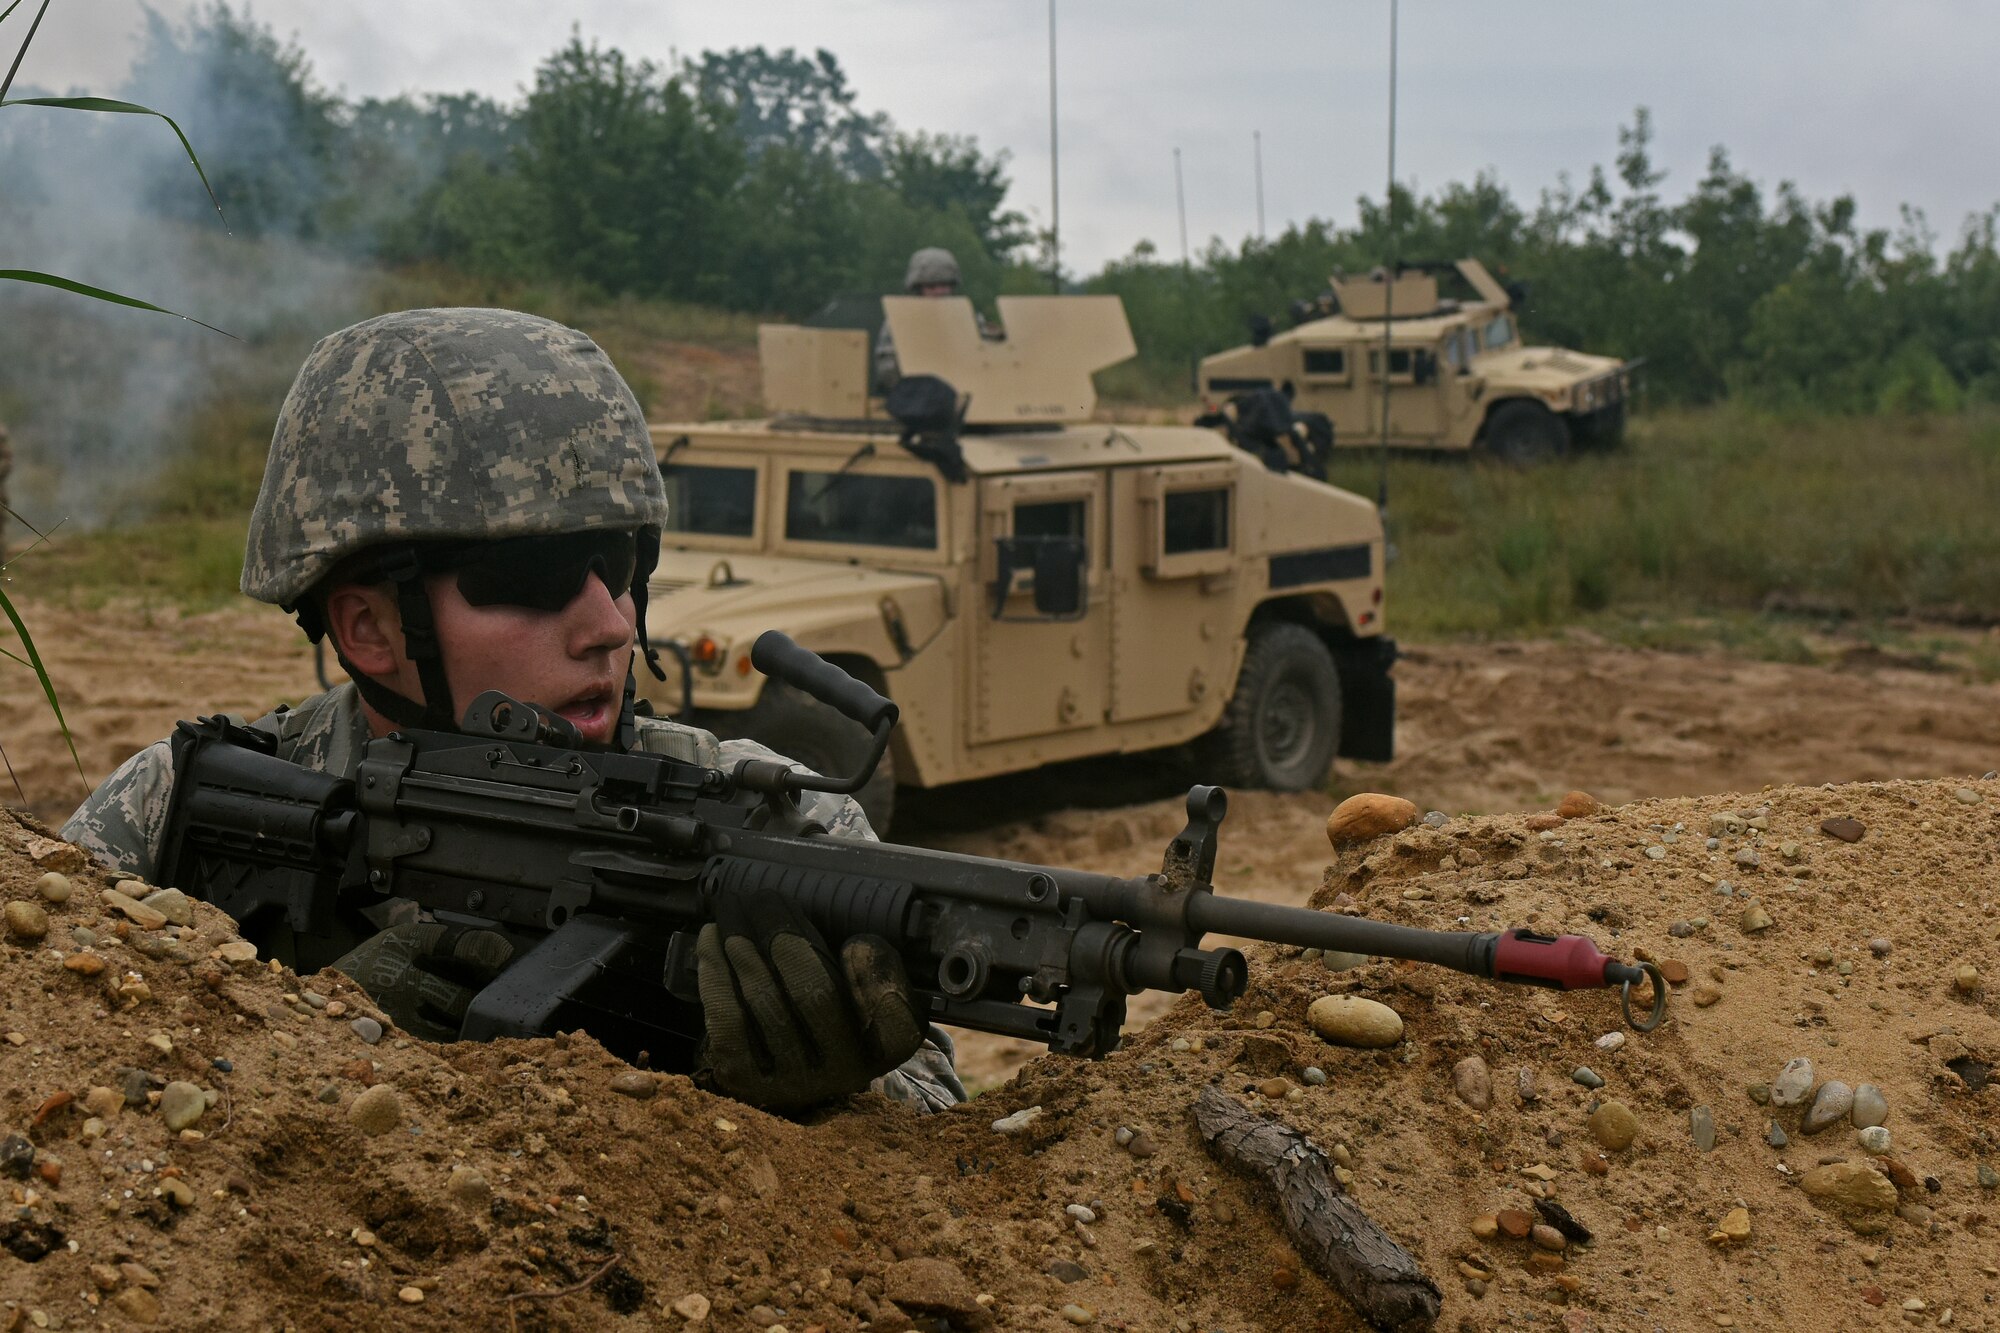 U.S. Air Force Senior Airman Sean White, with the 121st Security Forces Squadron, establishes security after receiving contact during a training exercise Aug. 18, 2015 at Camp Grayling Joint Maneuver Training Center, Mich. The 121st SFS Airmen spent three days at Camp Grayling in a simulated deployed environment as a part of their annual training. (U.S. Air National Guard photo by Airman Ashley Williams/Released)